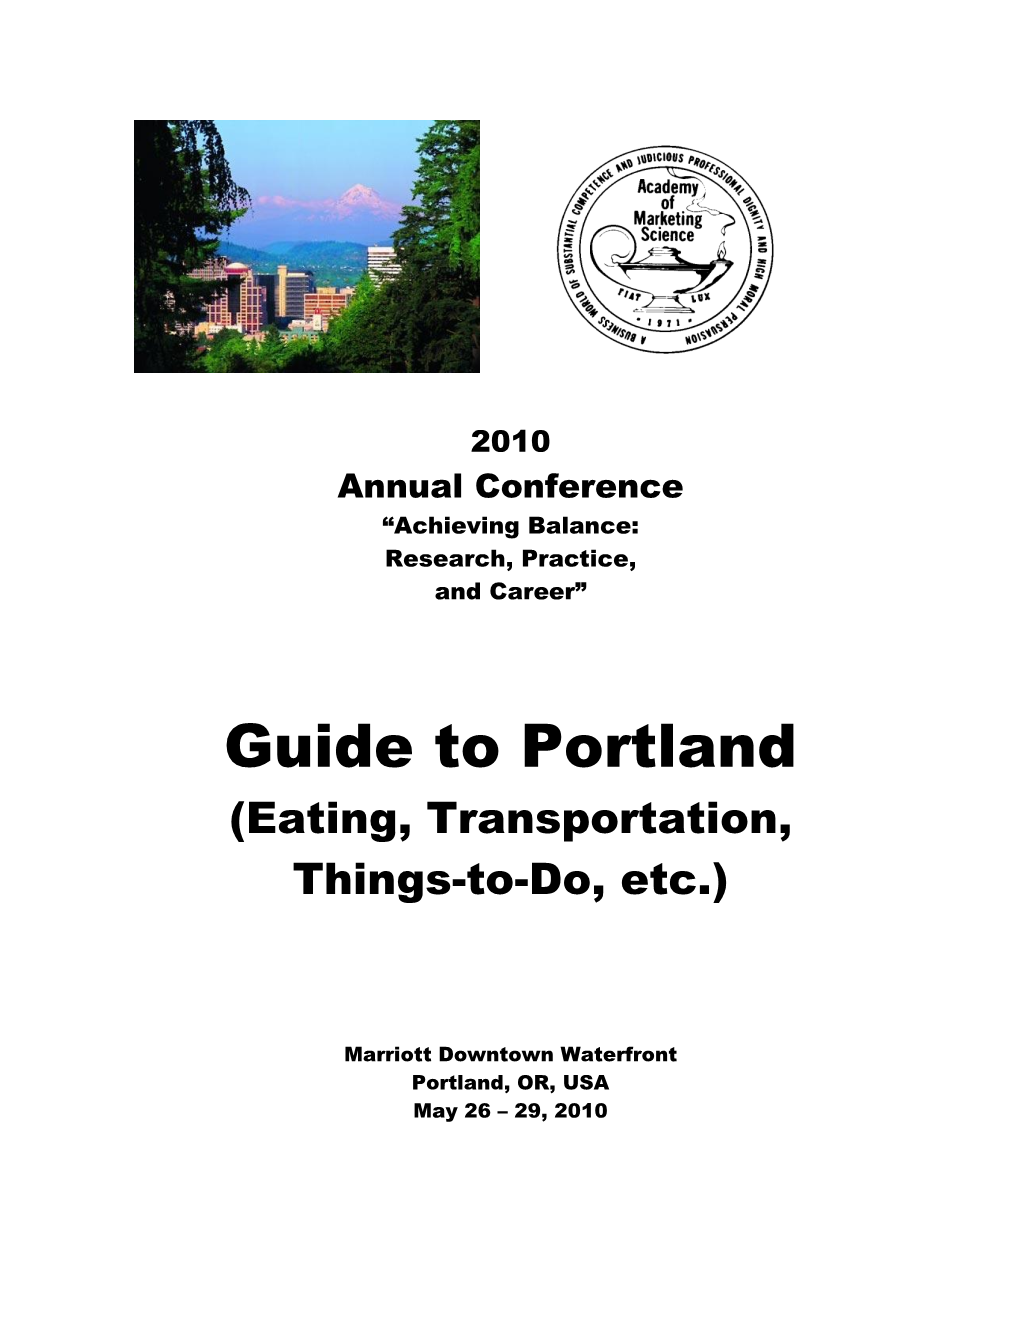 Guide to Portland (Eating, Transportation, Things-To-Do, Etc.)